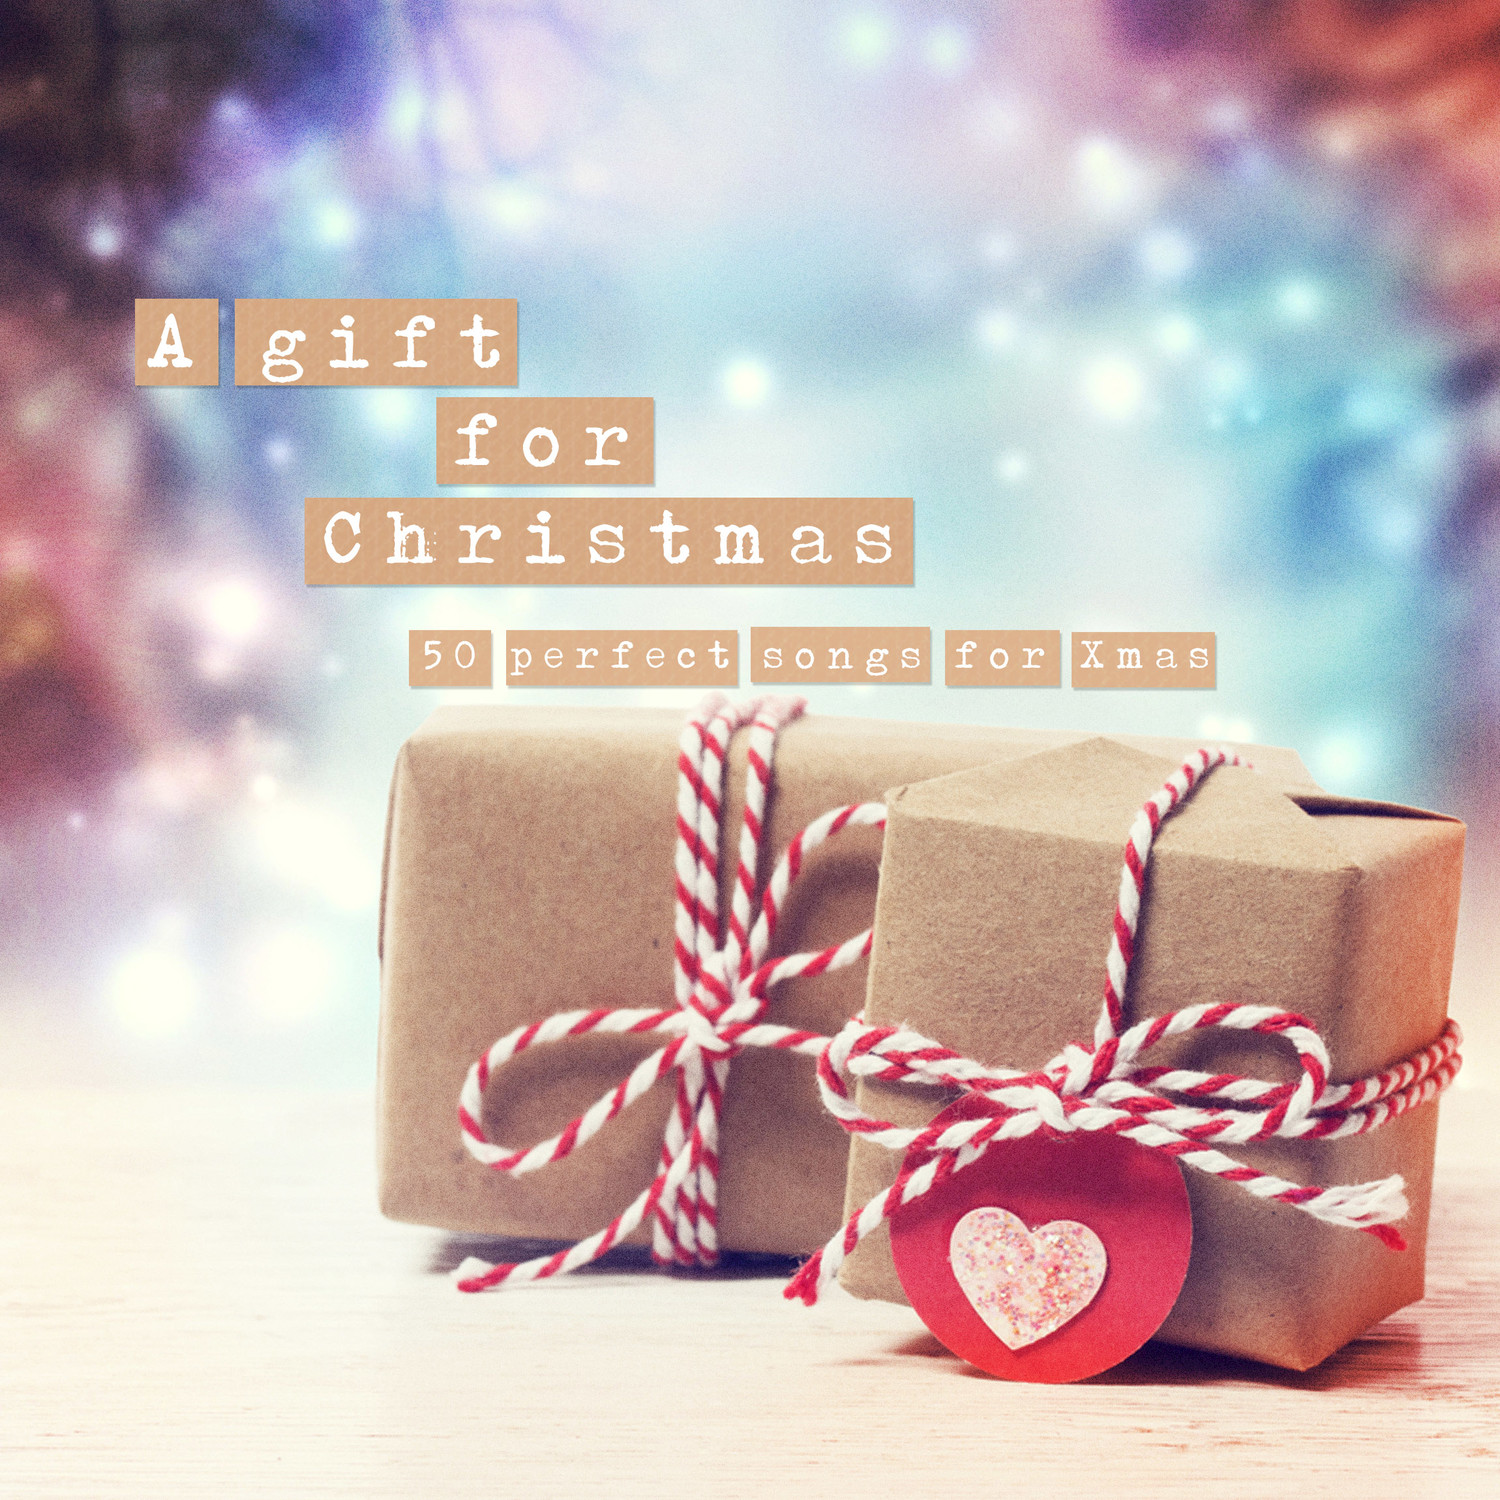 A Gift for Christmas (50 Perfect Songs for Xmas)